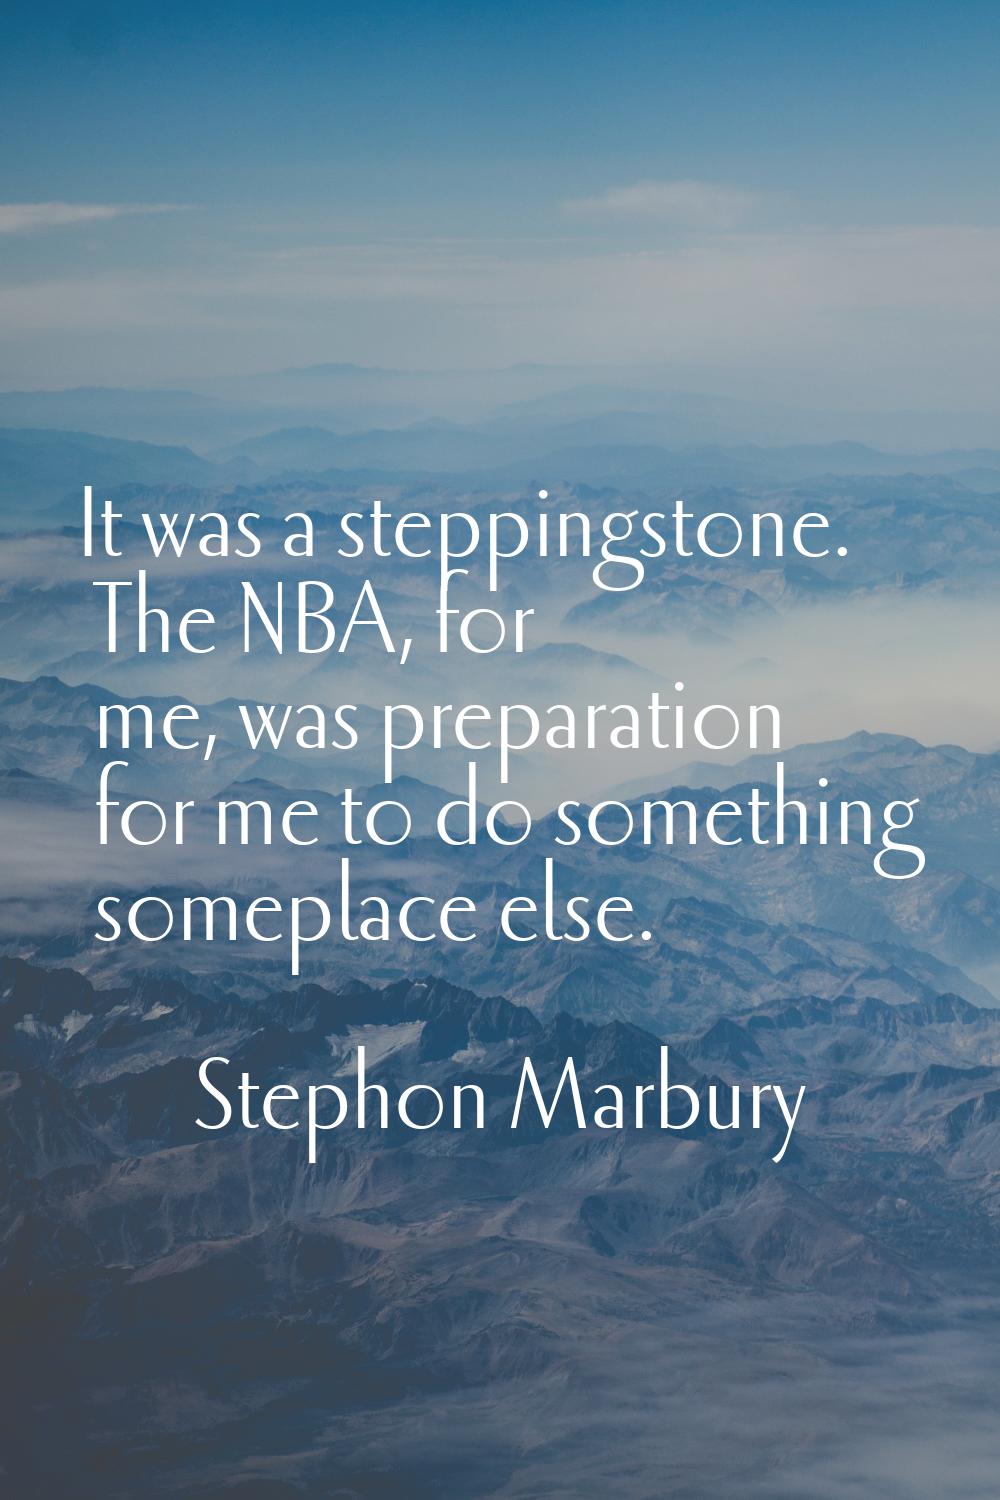 It was a steppingstone. The NBA, for me, was preparation for me to do something someplace else.